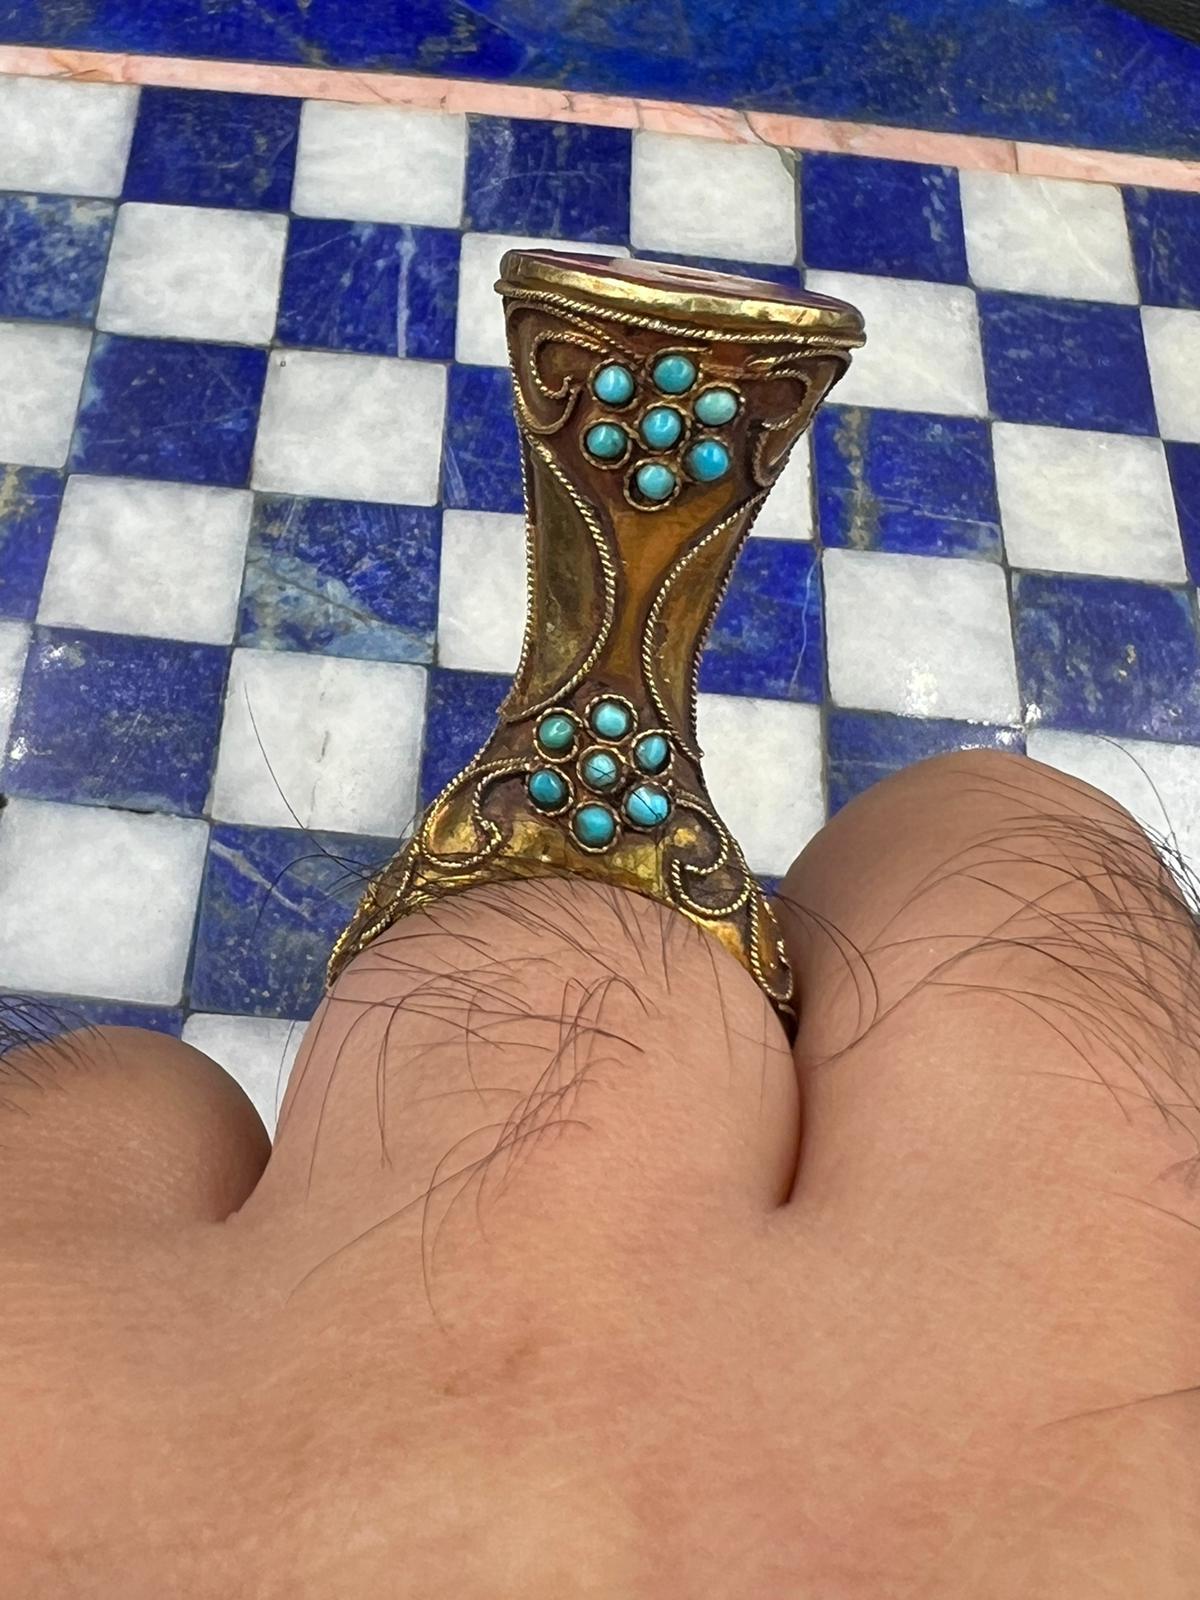 Bochic Curated Antique Ring From Afghanistan  18k Solid Gold & Antique Turquoise

Bochic Curated “Alexander Mocdon” Antique dome Afghanistan 18k Gold & Turquoise Ring

This is the kind of Ring you see in a Museum
329 BC Alexander crosses the Hindu